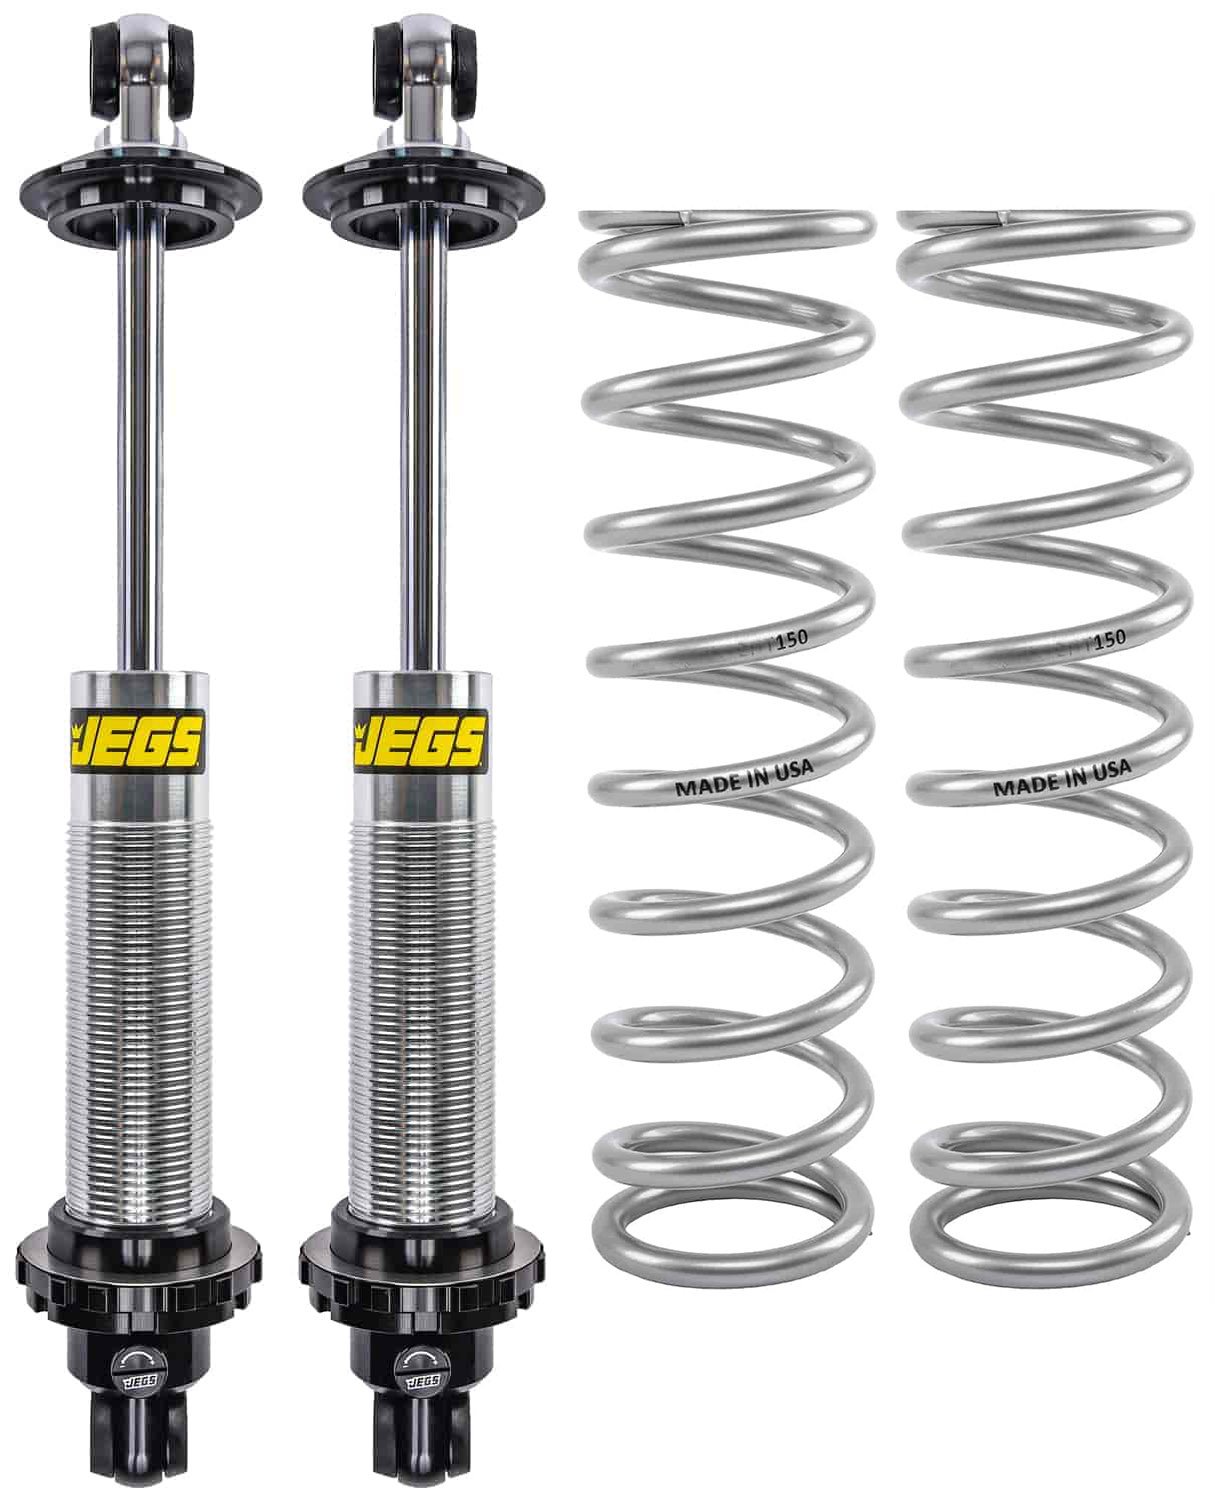 Single Adjustable Coil-Over Shocks and Coil-Over Springs Kit [12 in., 150 lbs./in. Springs]